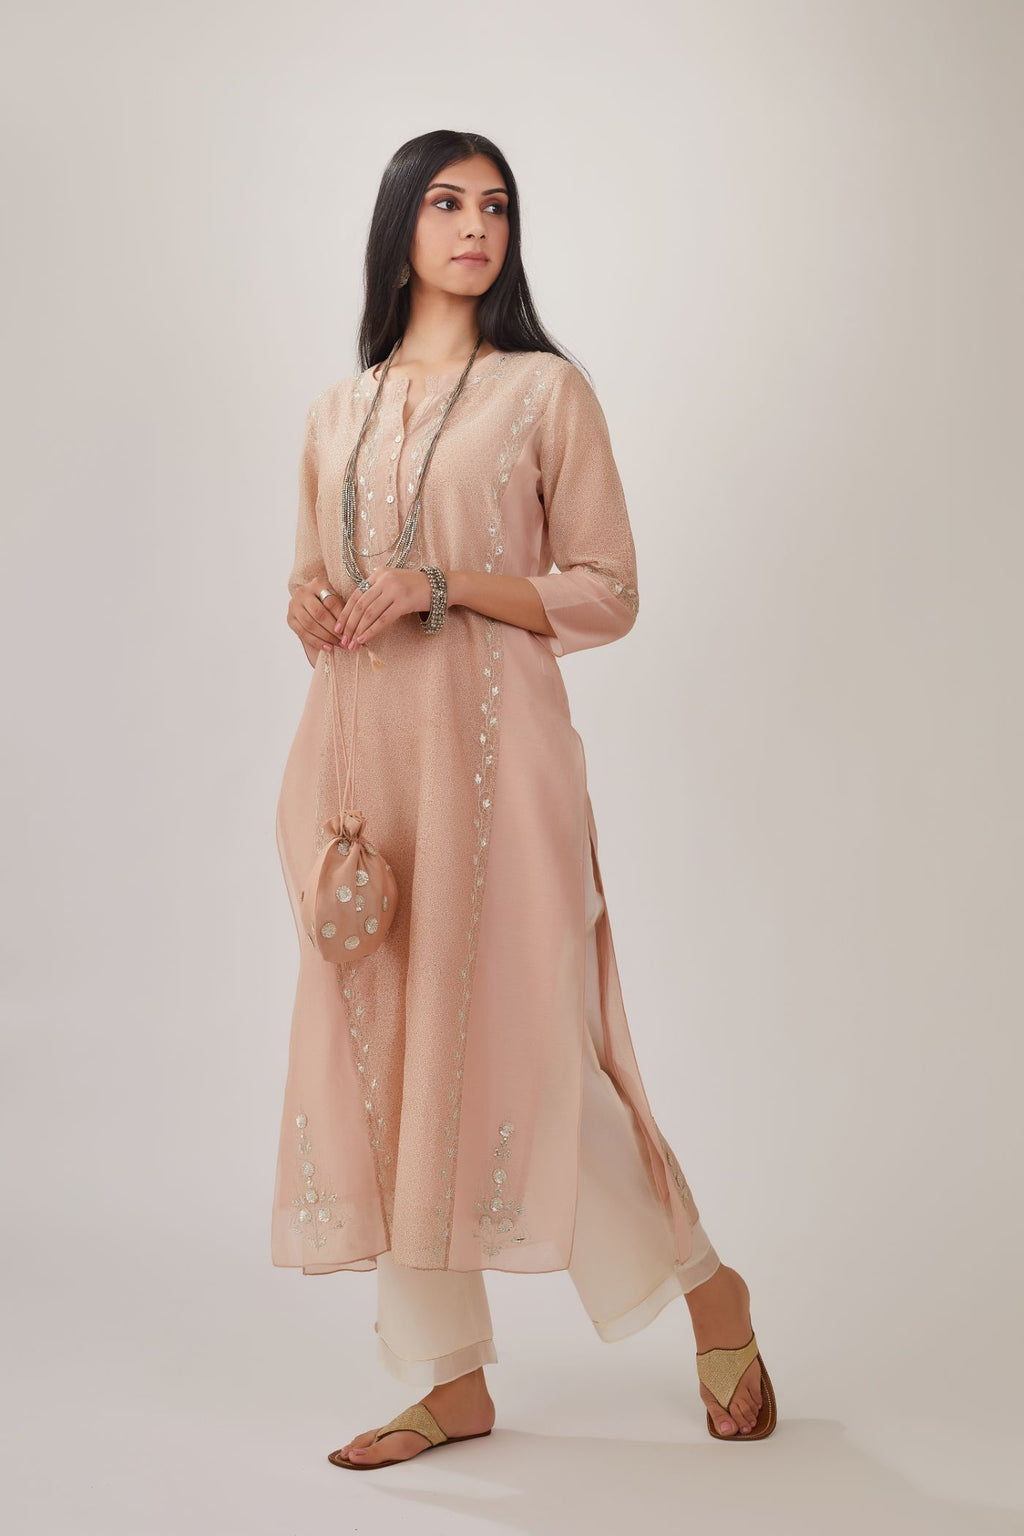 Pink hand block printed silk chanderi kurta with gota embroidery and plain side panels, paired with off white straight pants with gota and silk chanderi fabric detaling at bottom hem